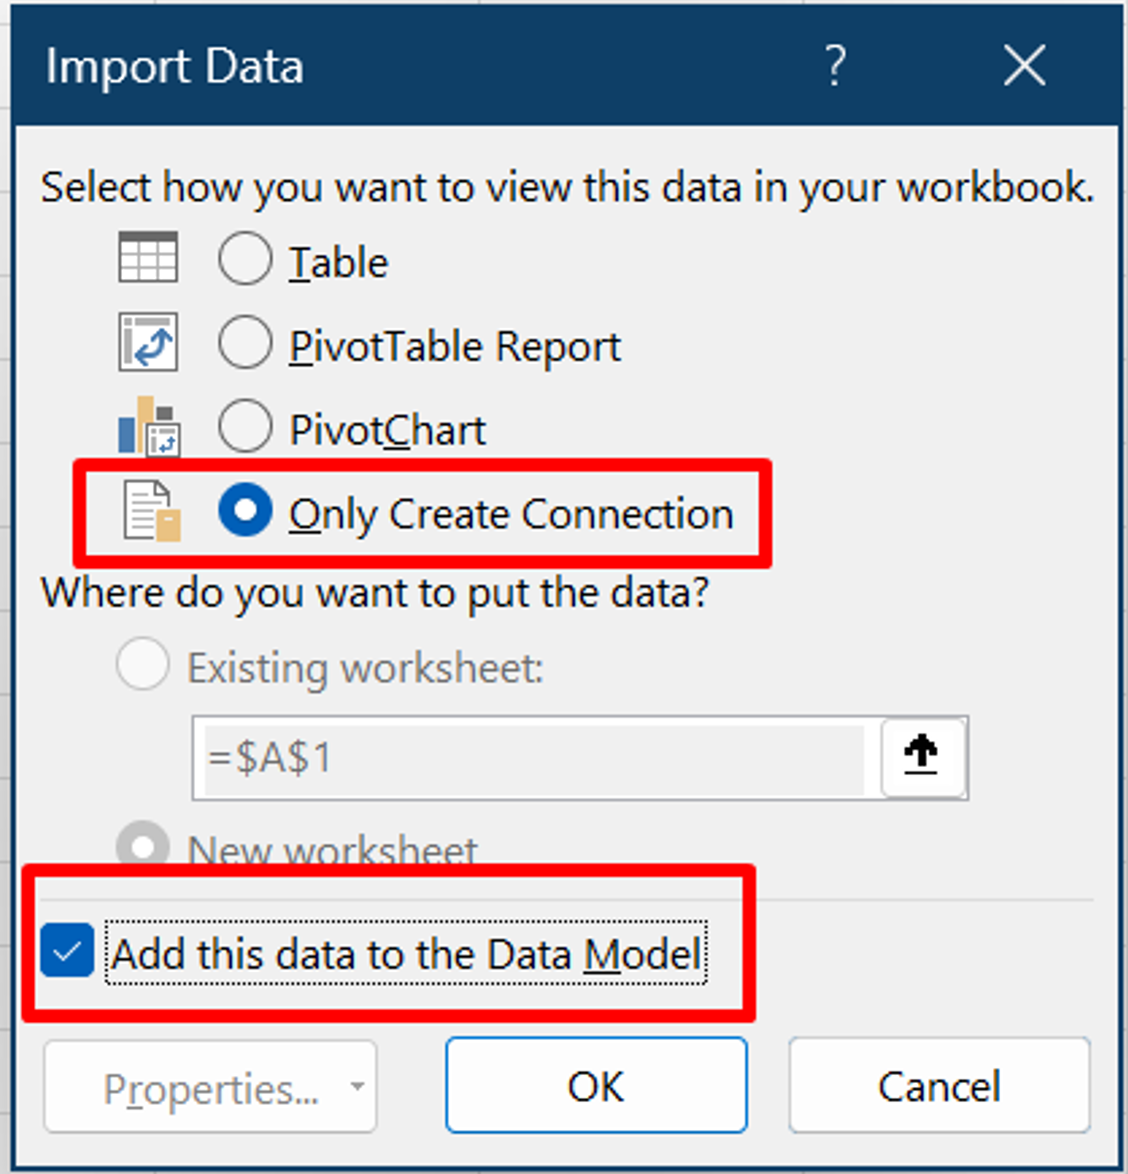 Screenshot of the Import Data window, with two items highlighted: Only Create Connections and Add this data to the Data Model.